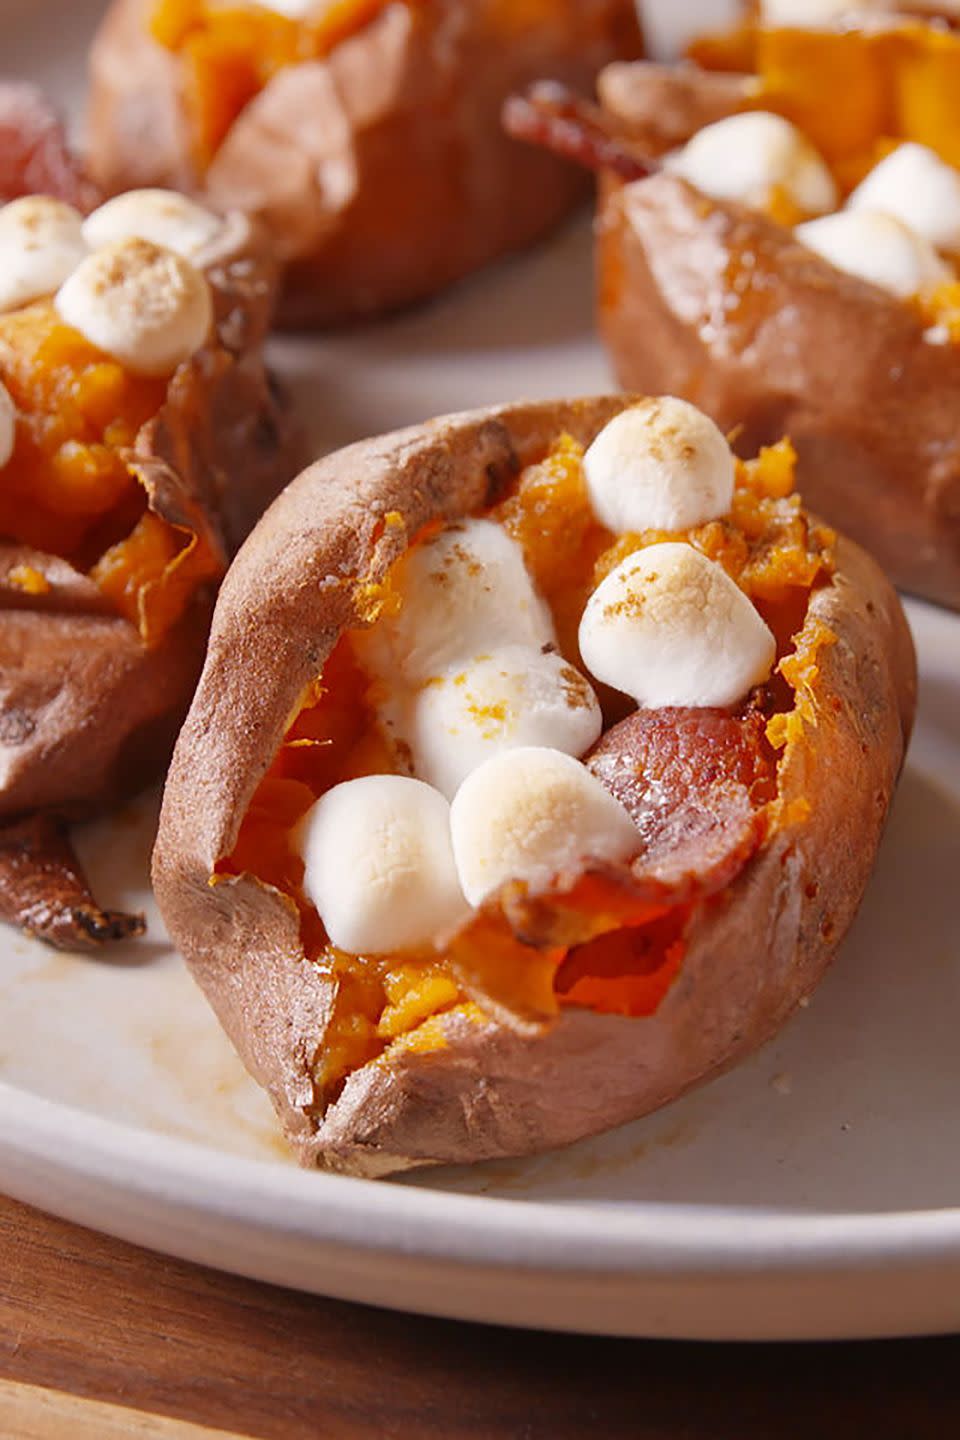 <p>Get your sweet and salty fix with these sweet potatoes loaded with marshmallows and bacon.</p><p><strong>Get the recipe at <a href="http://www.delish.com/cooking/recipe-ideas/recipes/a44616/twice-baked-sweet-potatoes-bacon-brown-sugar-marshmallows-recipe/" rel="nofollow noopener" target="_blank" data-ylk="slk:Delish" class="link rapid-noclick-resp">Delish</a>. </strong><br></p>